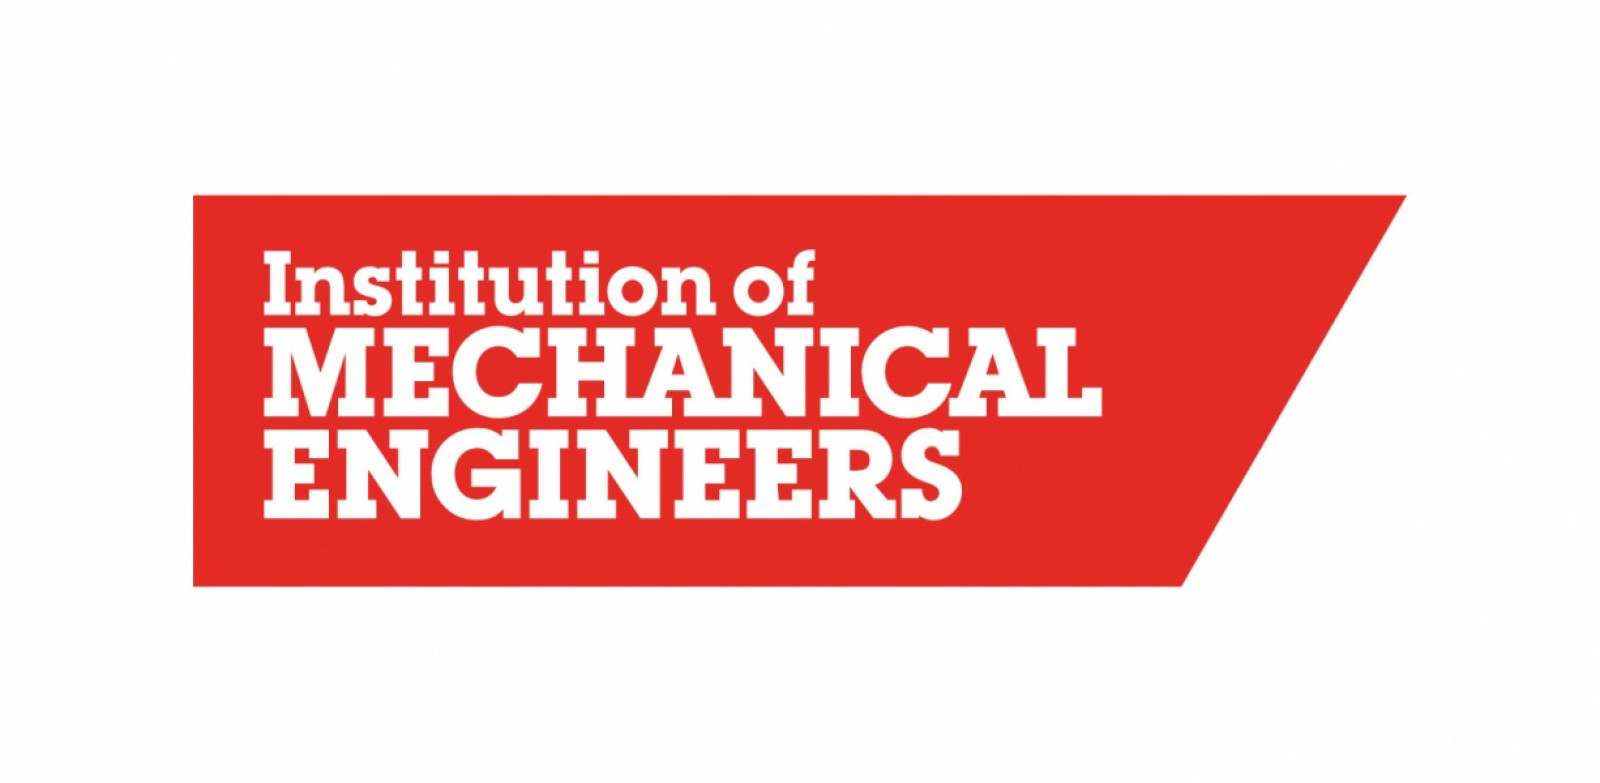 Members Competition - Win a place on our table at the Midlands Engineering Dinner